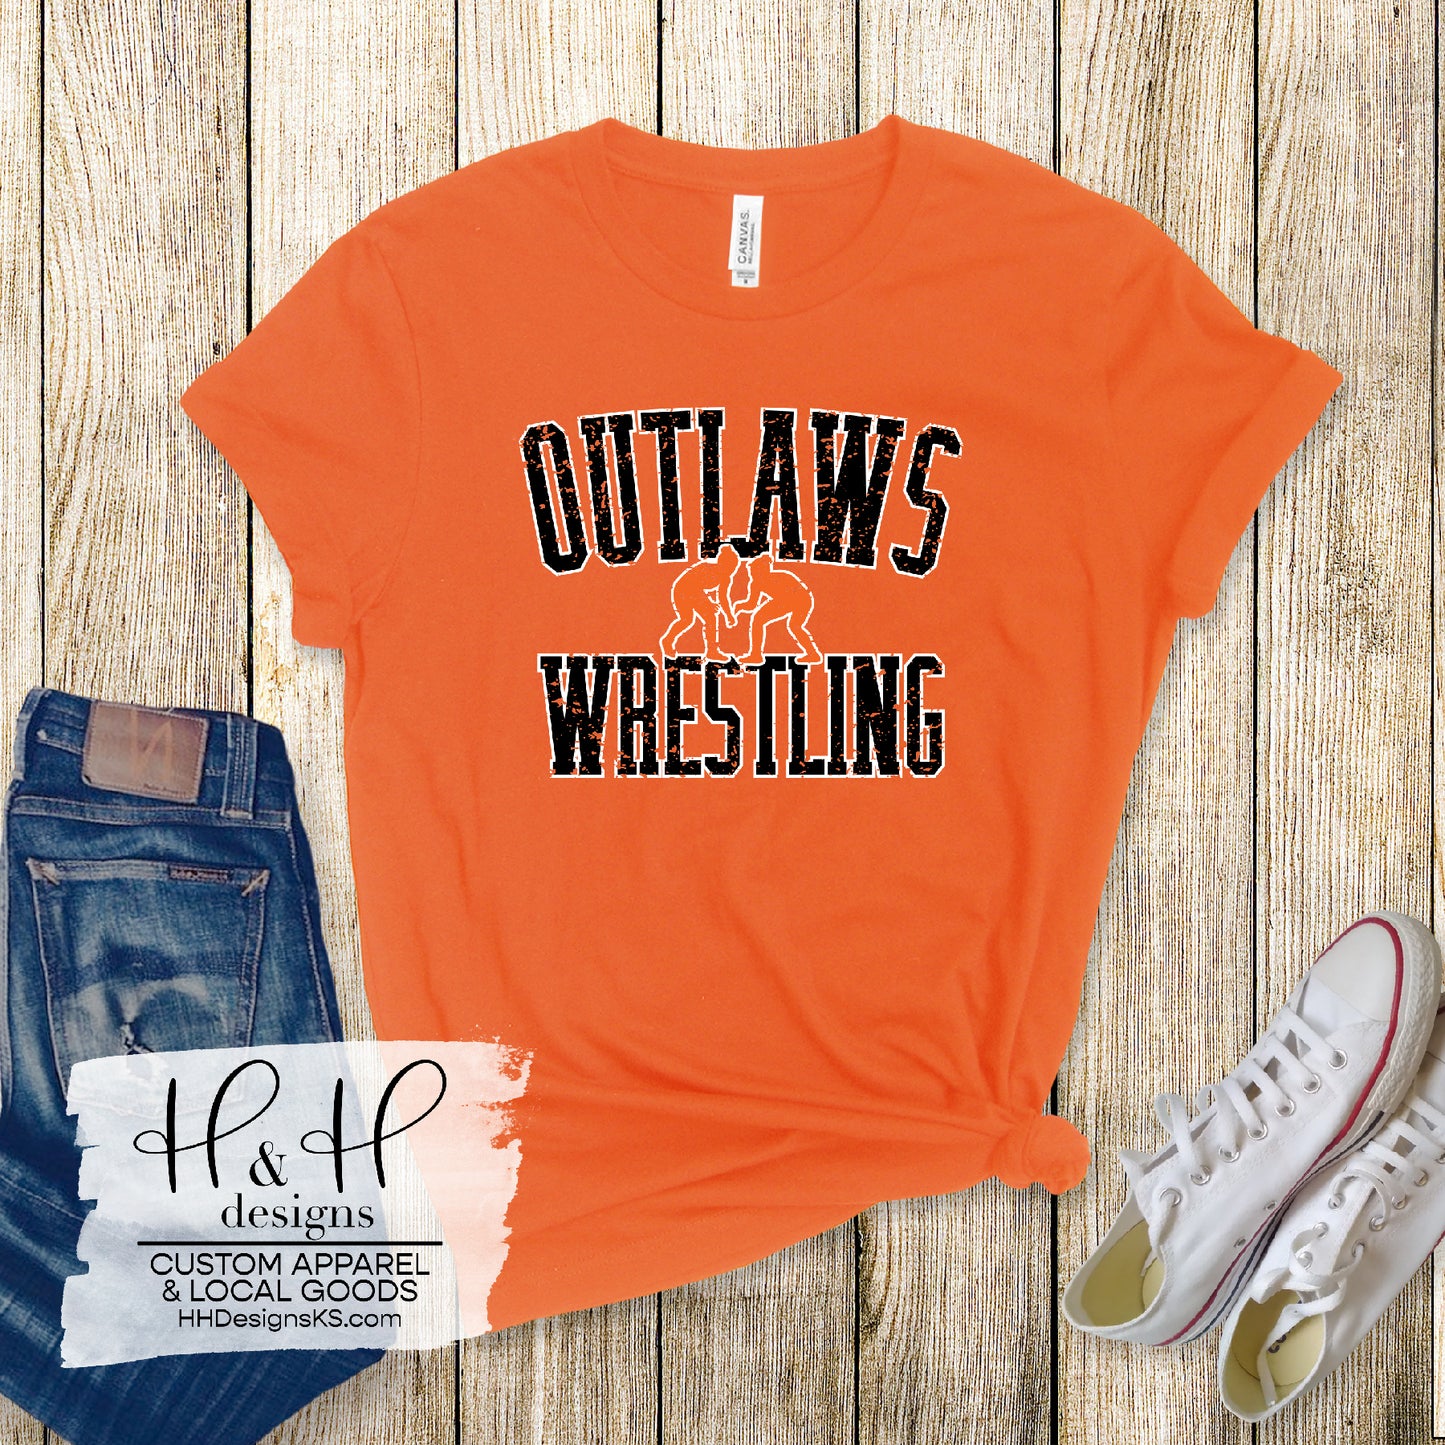 Outlaws Wrestling Block - FEMALE Wrestler - All color options available